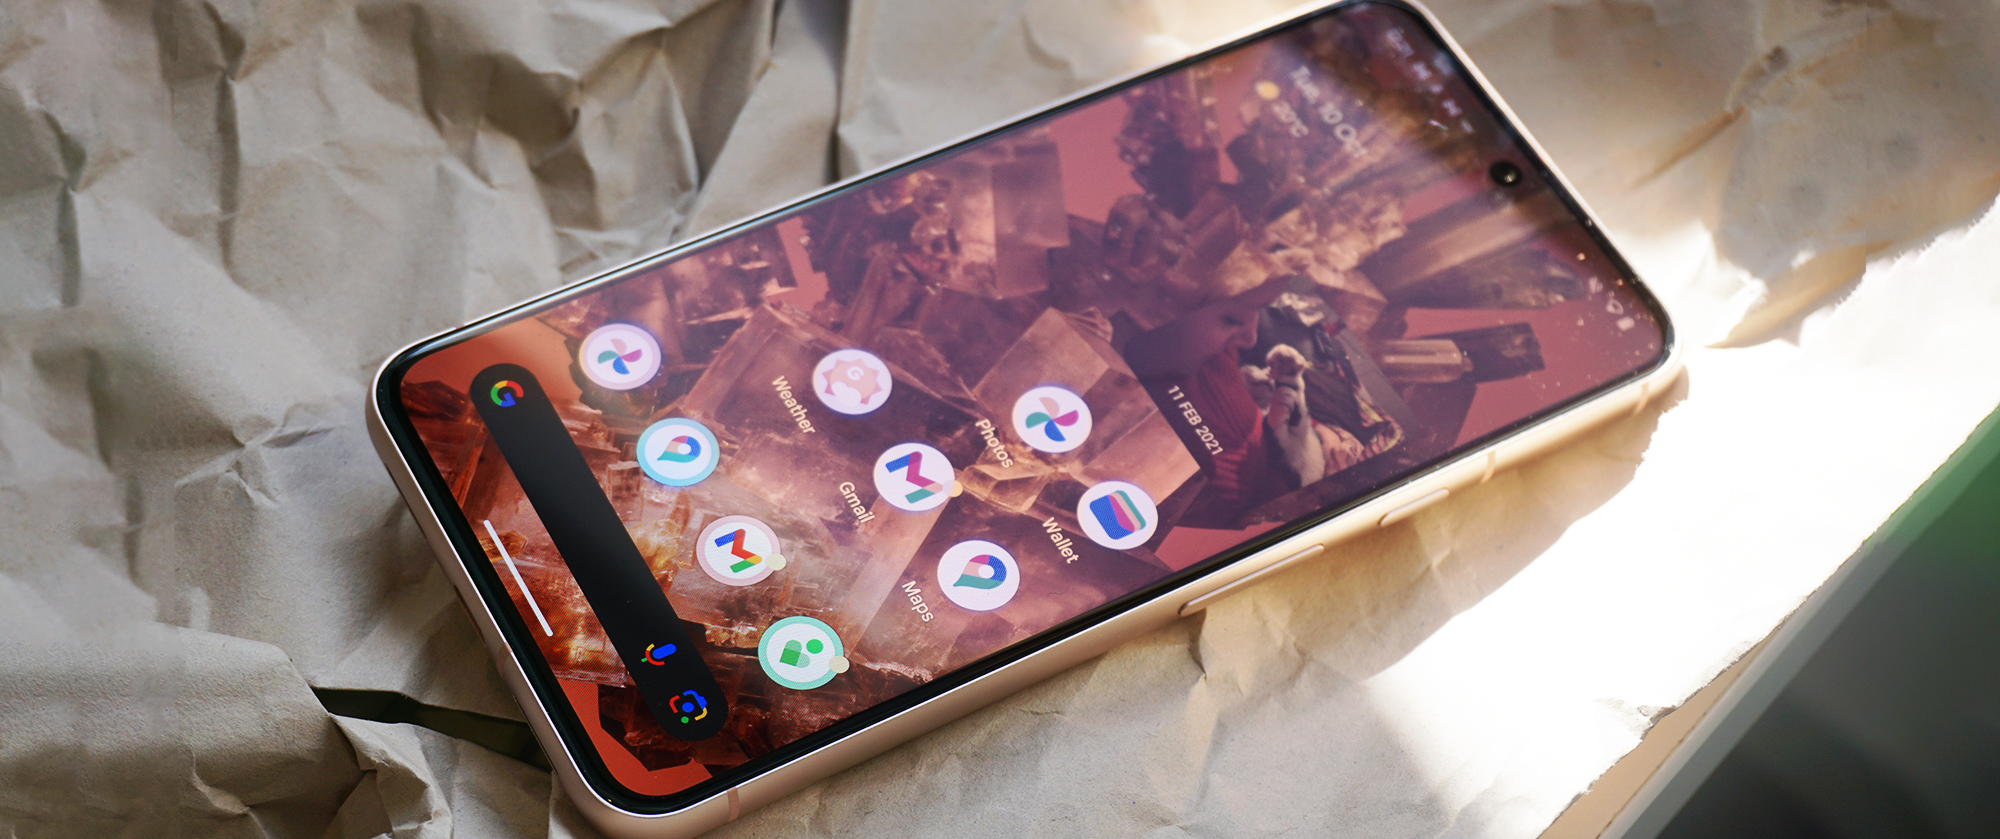 Google Pixel 8 hands-on: Checking out the 8 and 8 Pro - Android